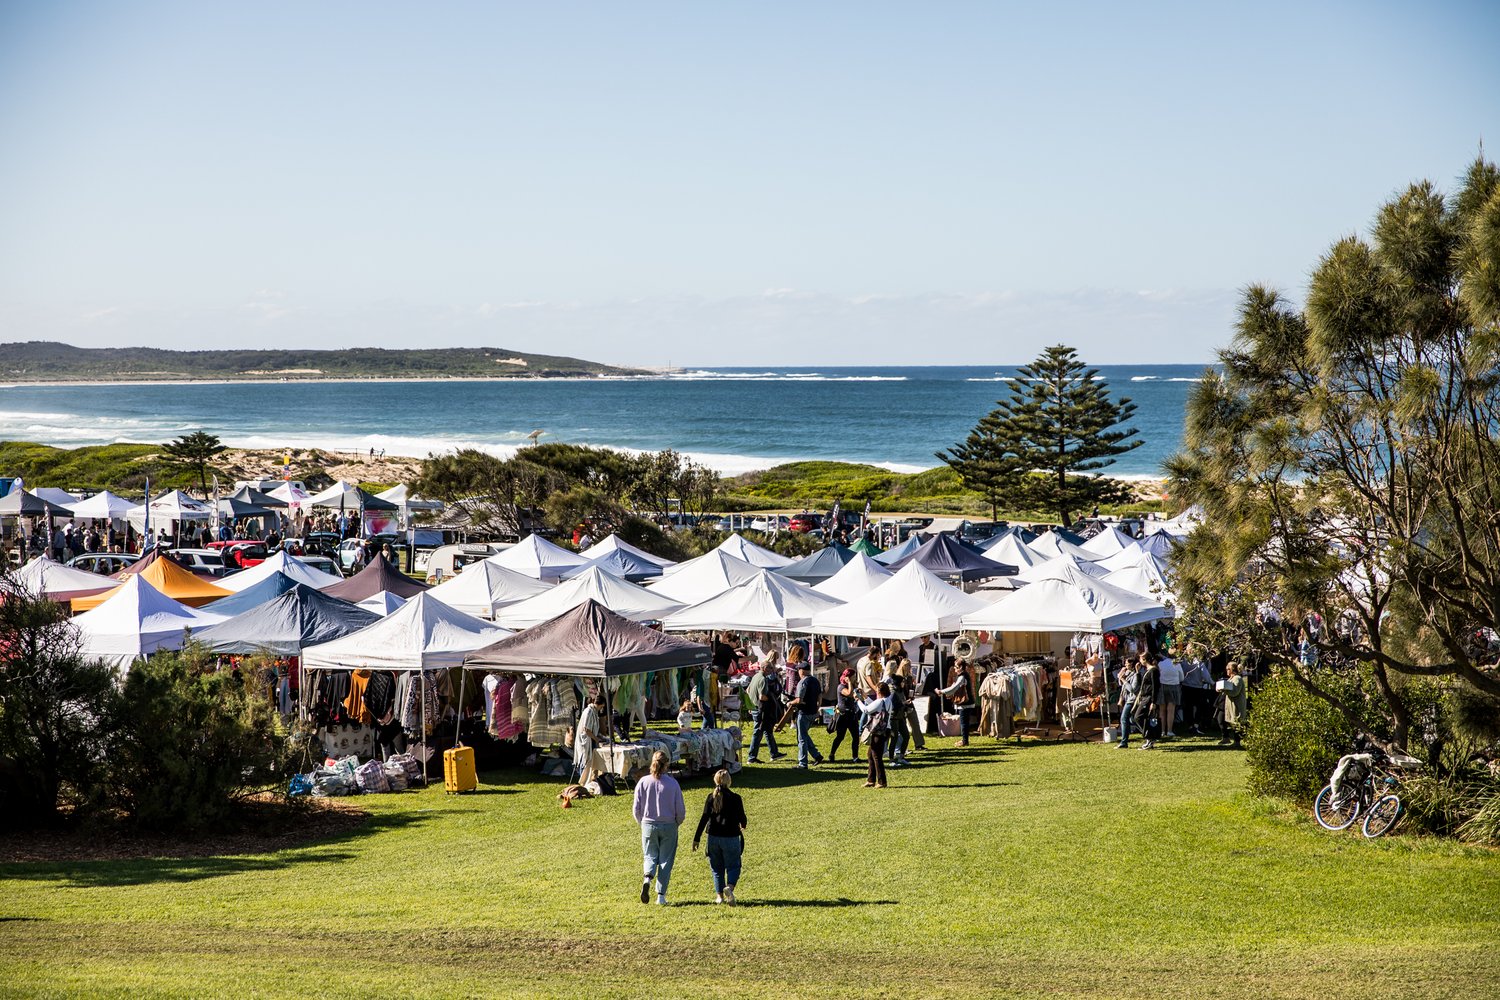 Visit Oh Flossy this weekend at the Cronulla Winter Markets!